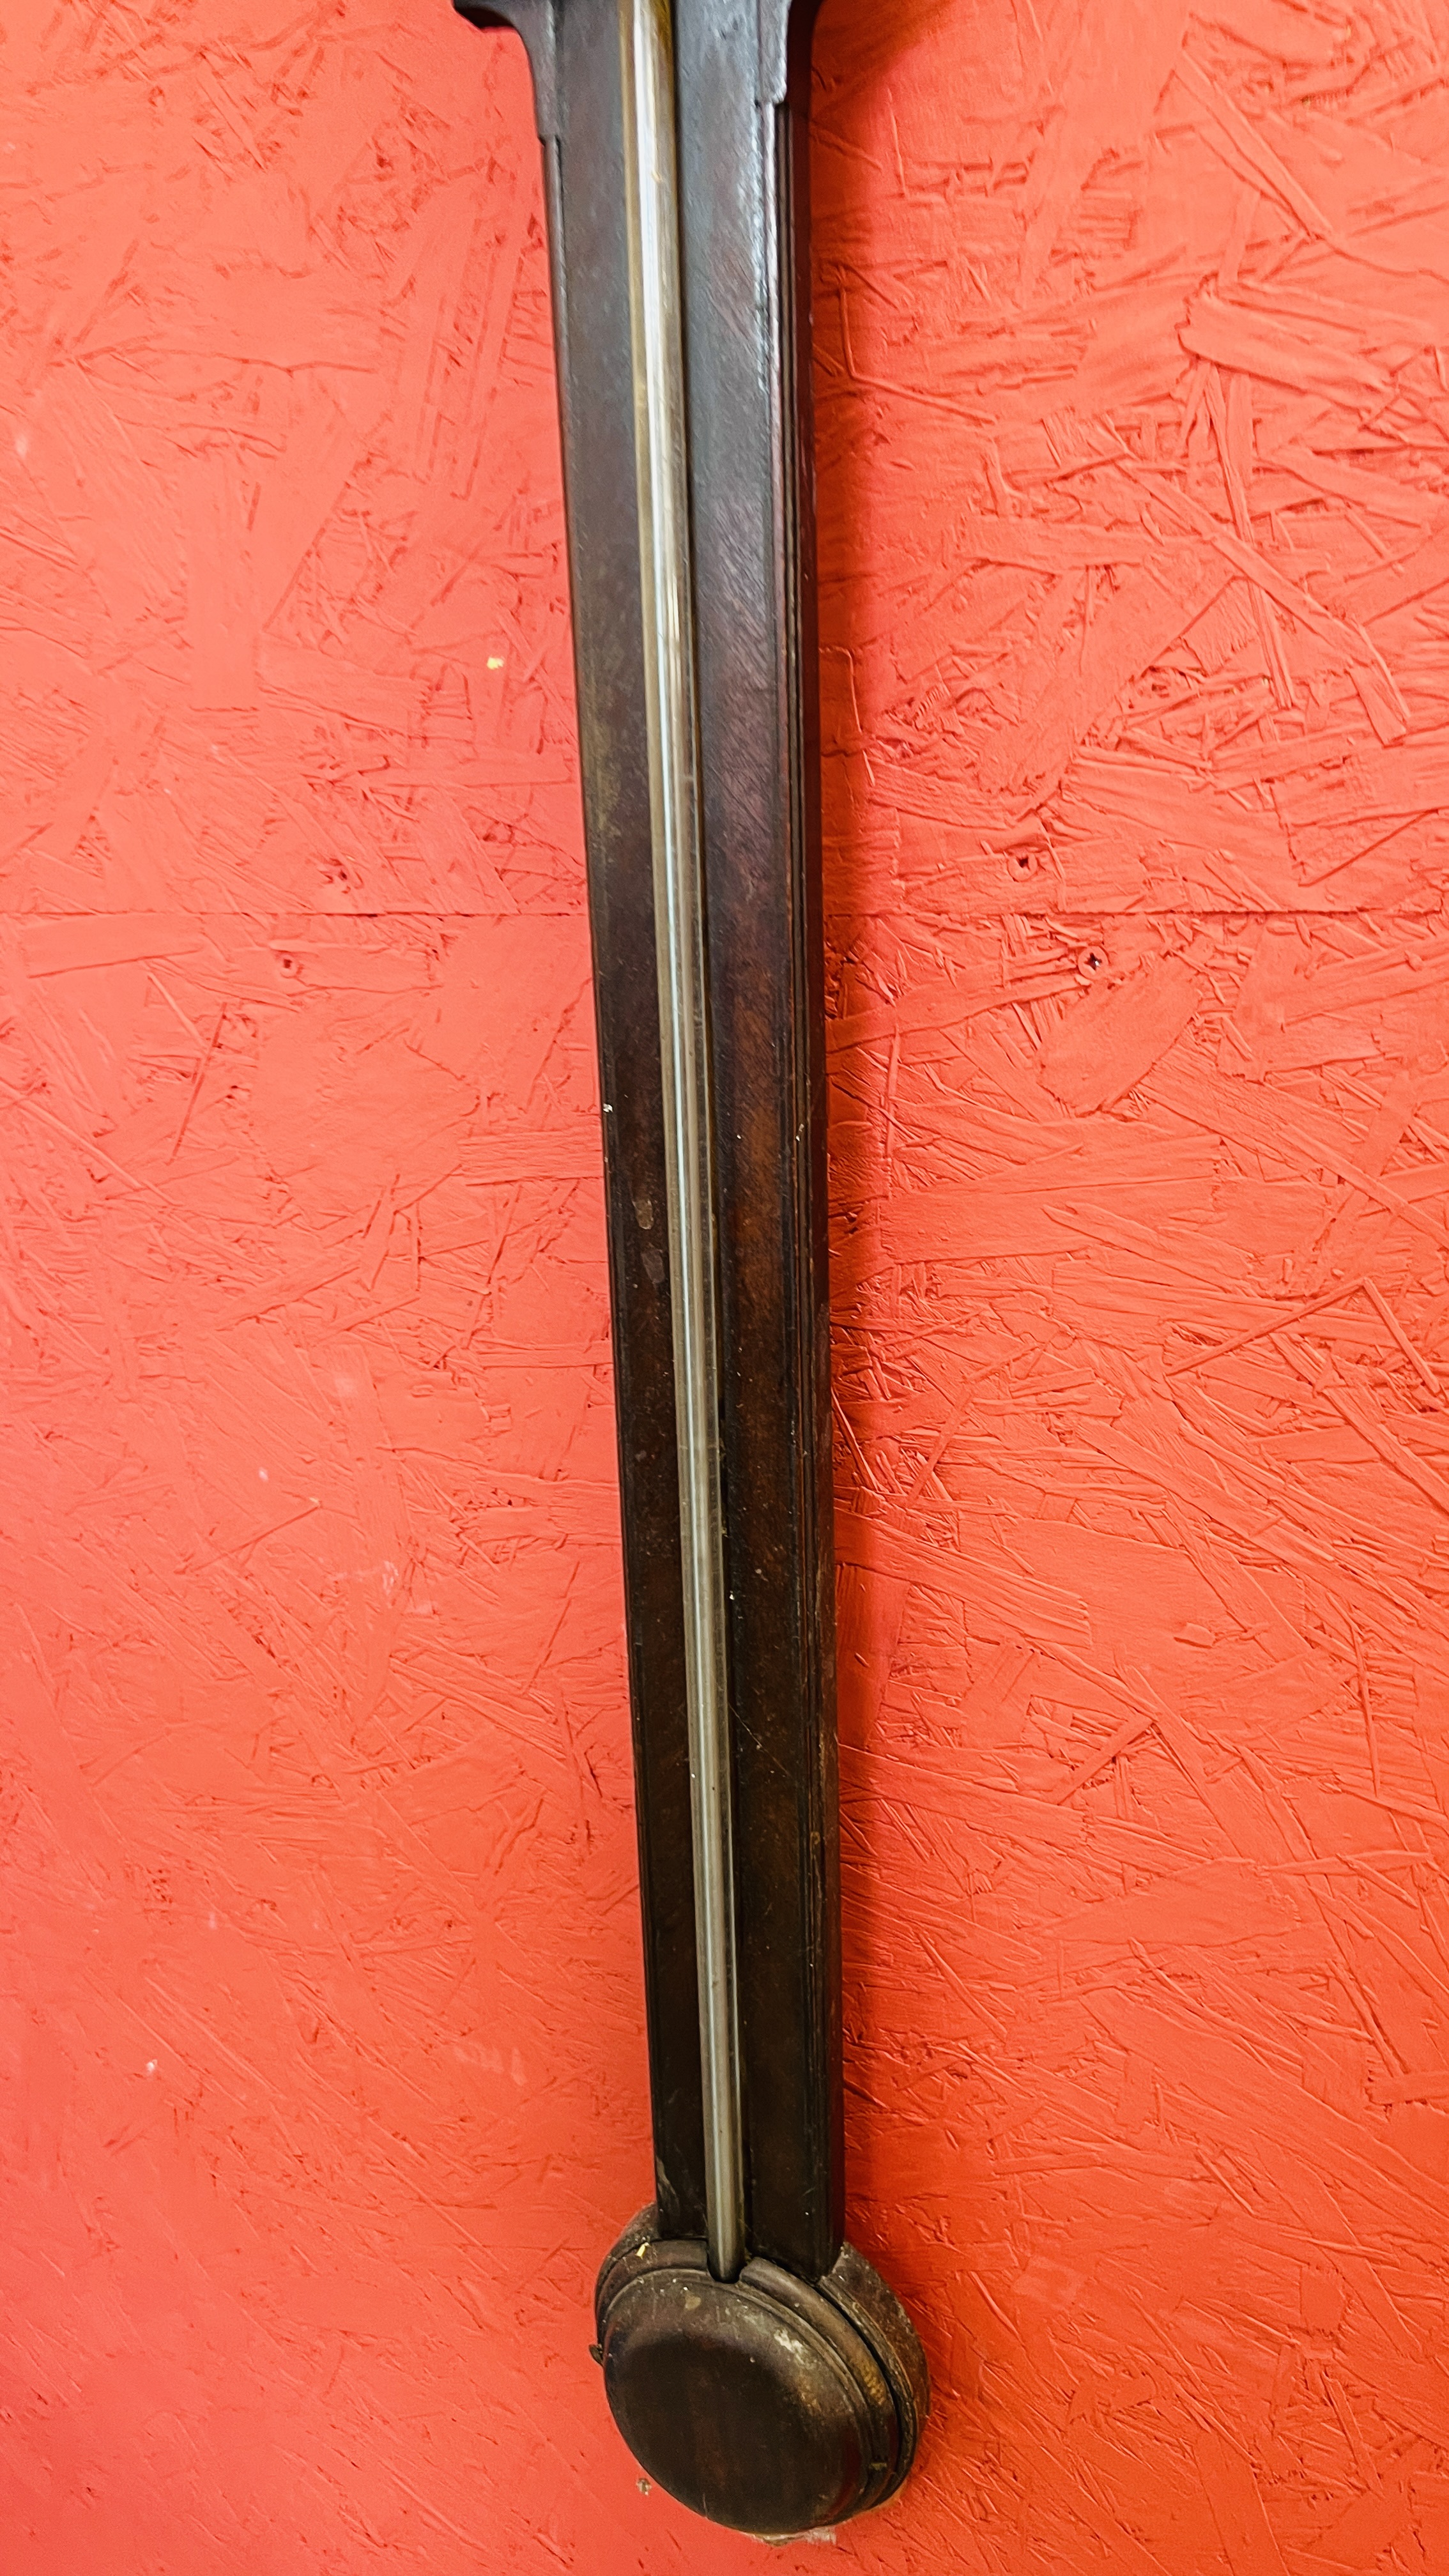 VINTAGE MAHOGANY STICK BAROMETER BEARING MAKER'S MARK "TACCH1 BEDFORD" (REQUIRES ATTENTION) - H - Image 5 of 6